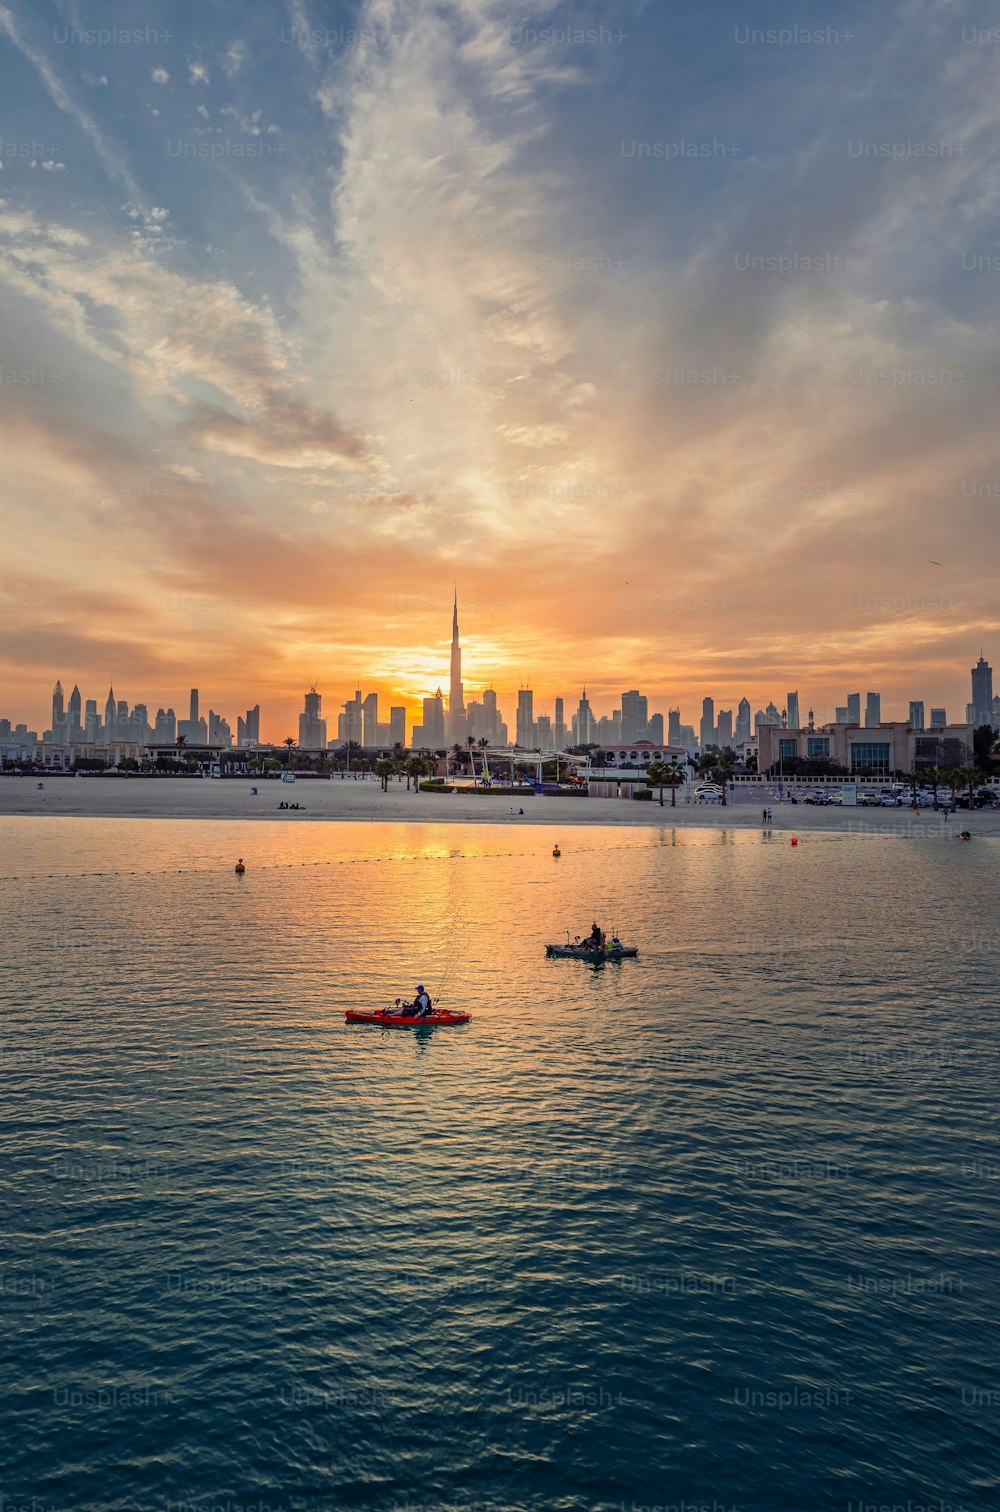 A dramatic scenery of a colorful sunset in the cloudy sky over the Dubai cityscape